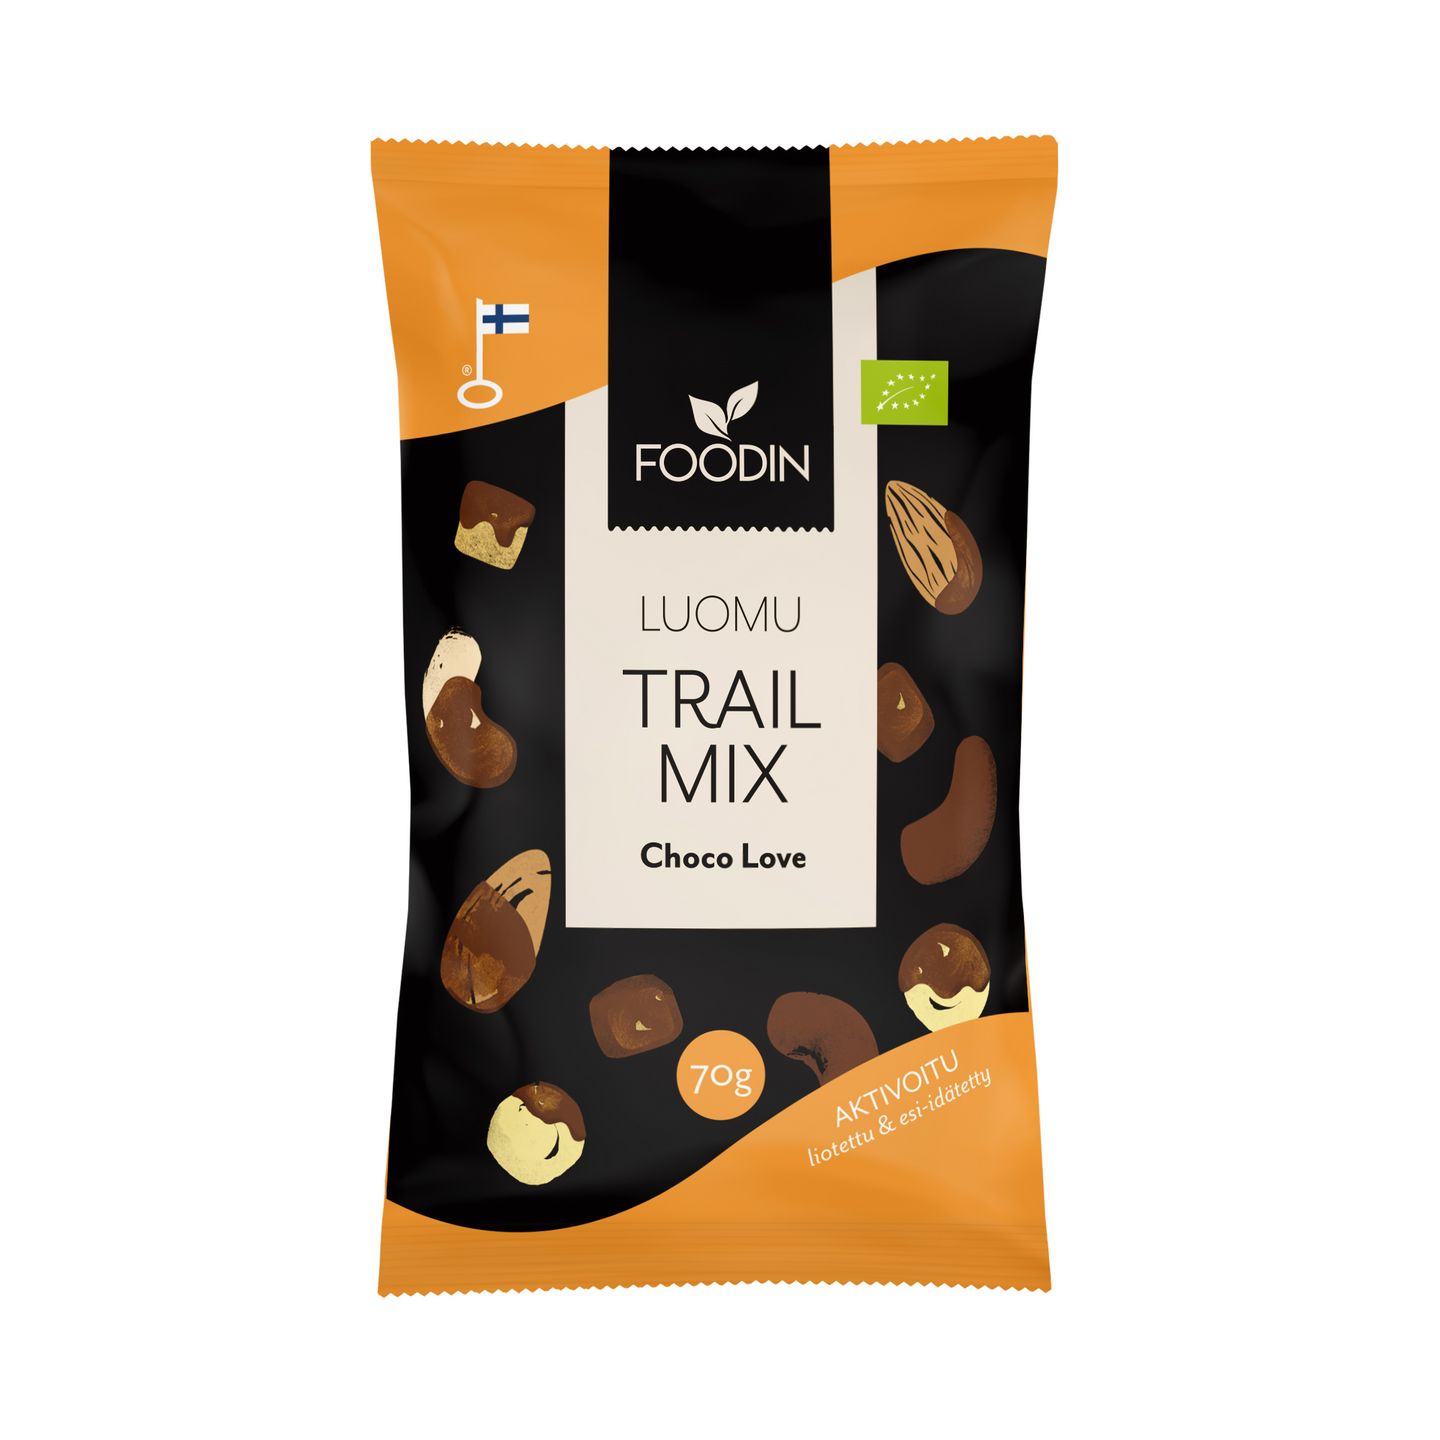 Foodin Activated Trailmix chocolove 70g luomu